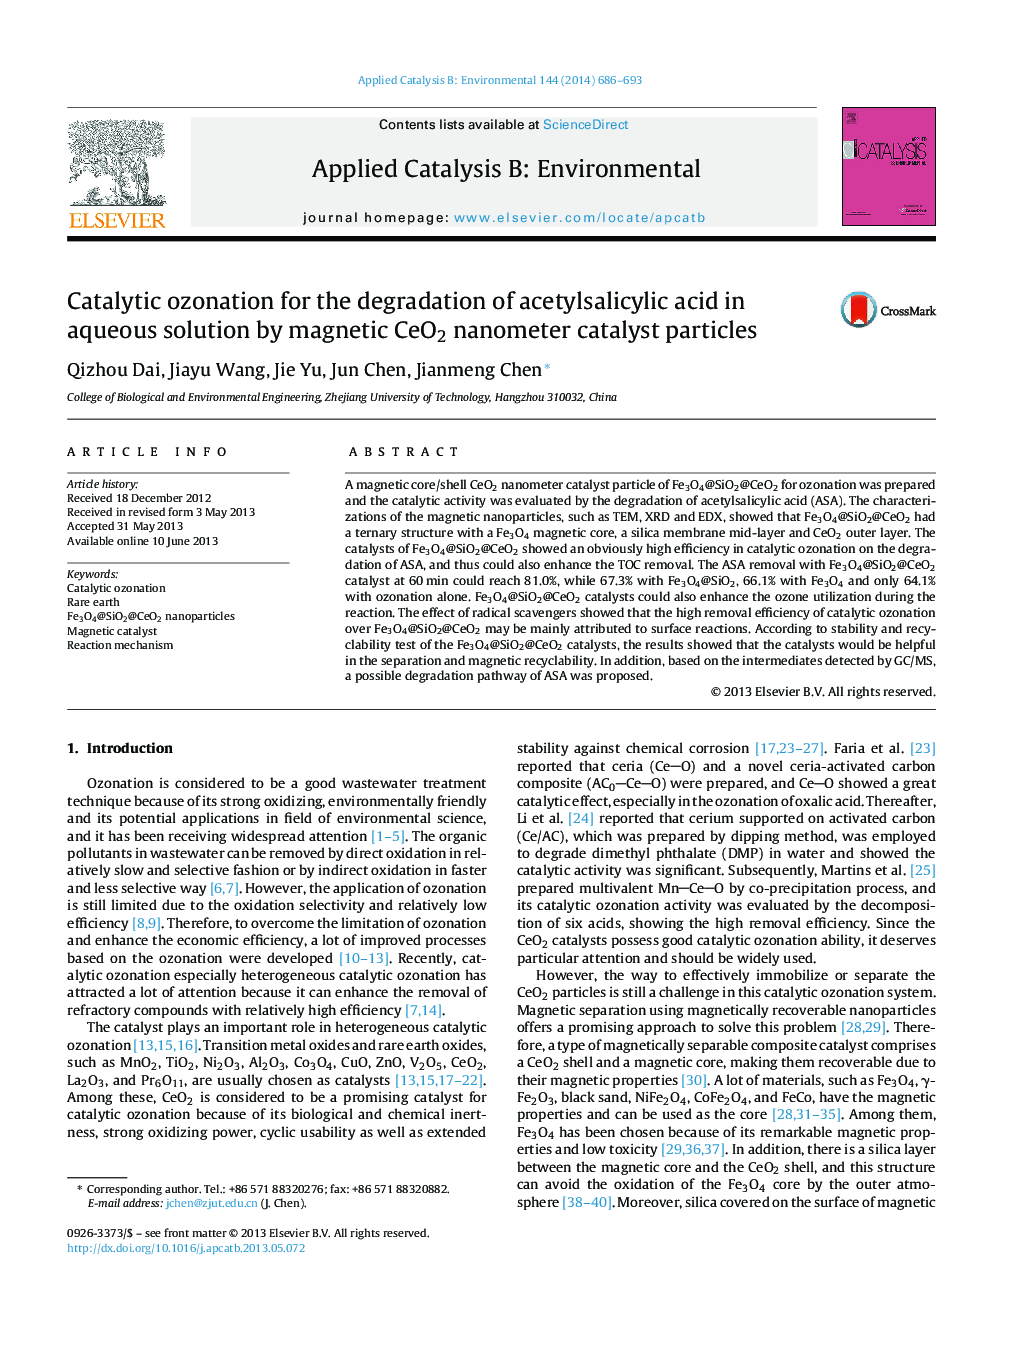 Catalytic ozonation for the degradation of acetylsalicylic acid in aqueous solution by magnetic CeO2 nanometer catalyst particles